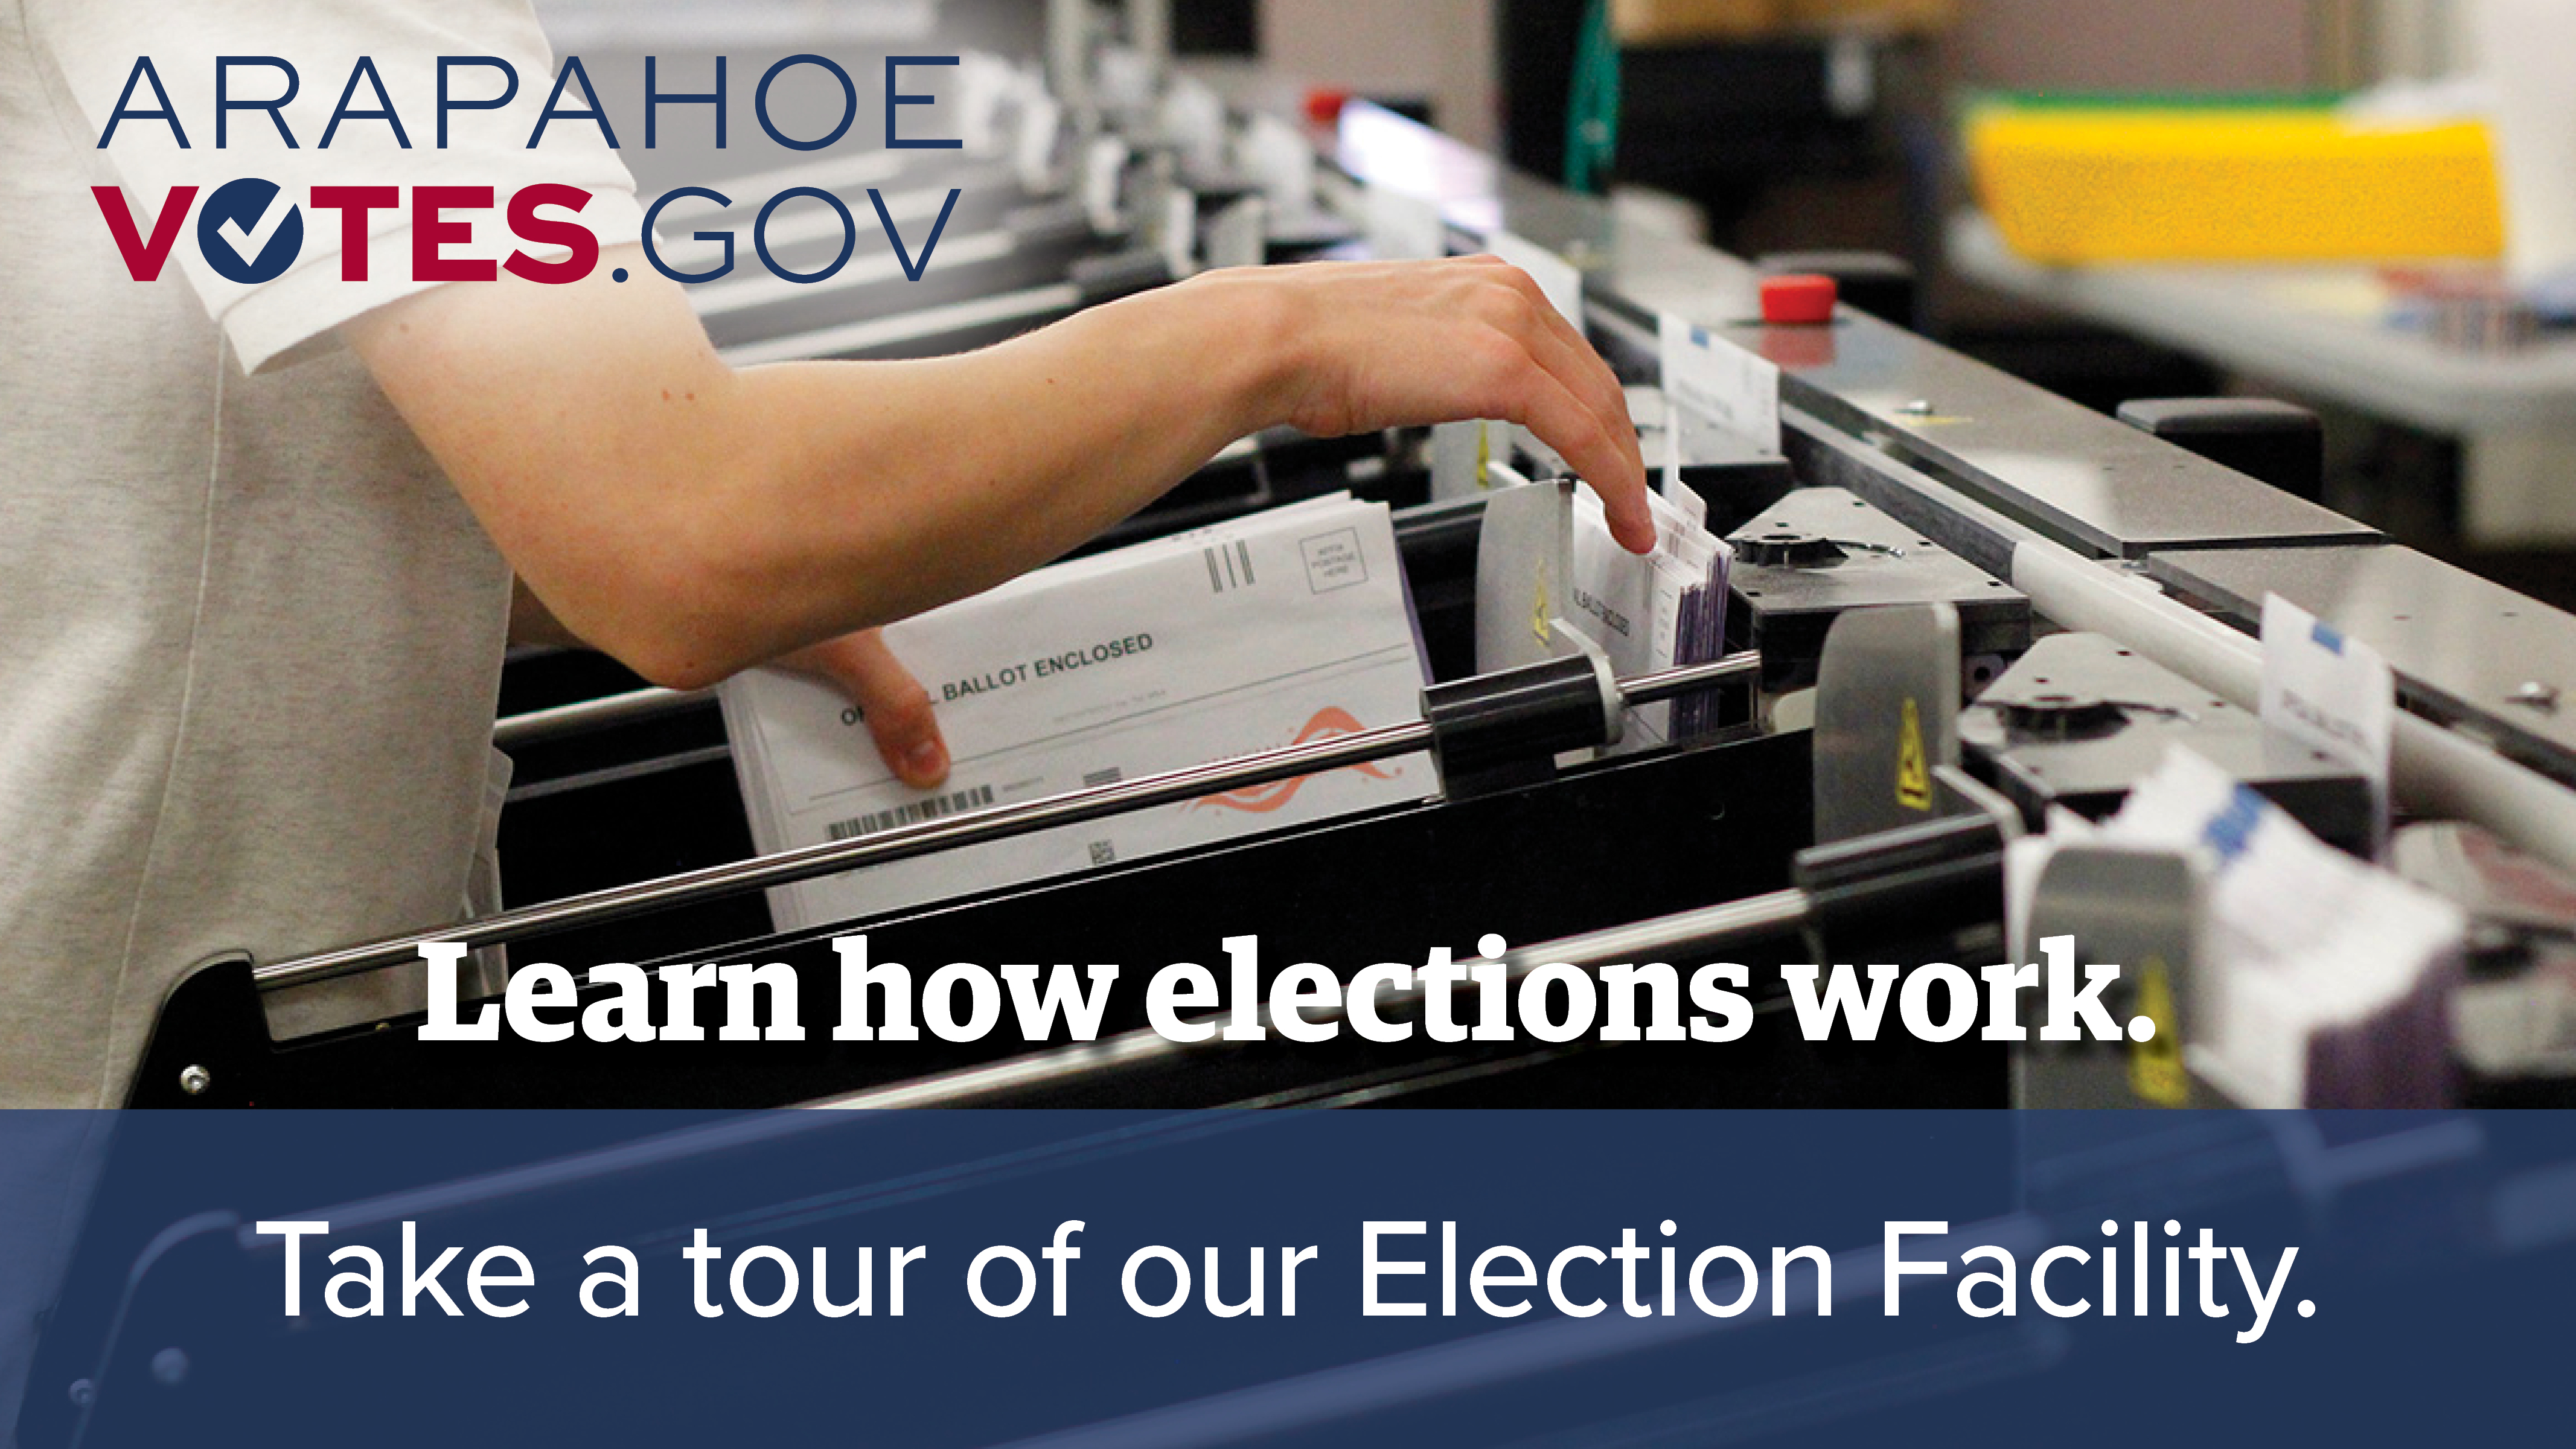 Arapahoe County elections staff handle ballot envelopes sorted by the Agilis sorting device.